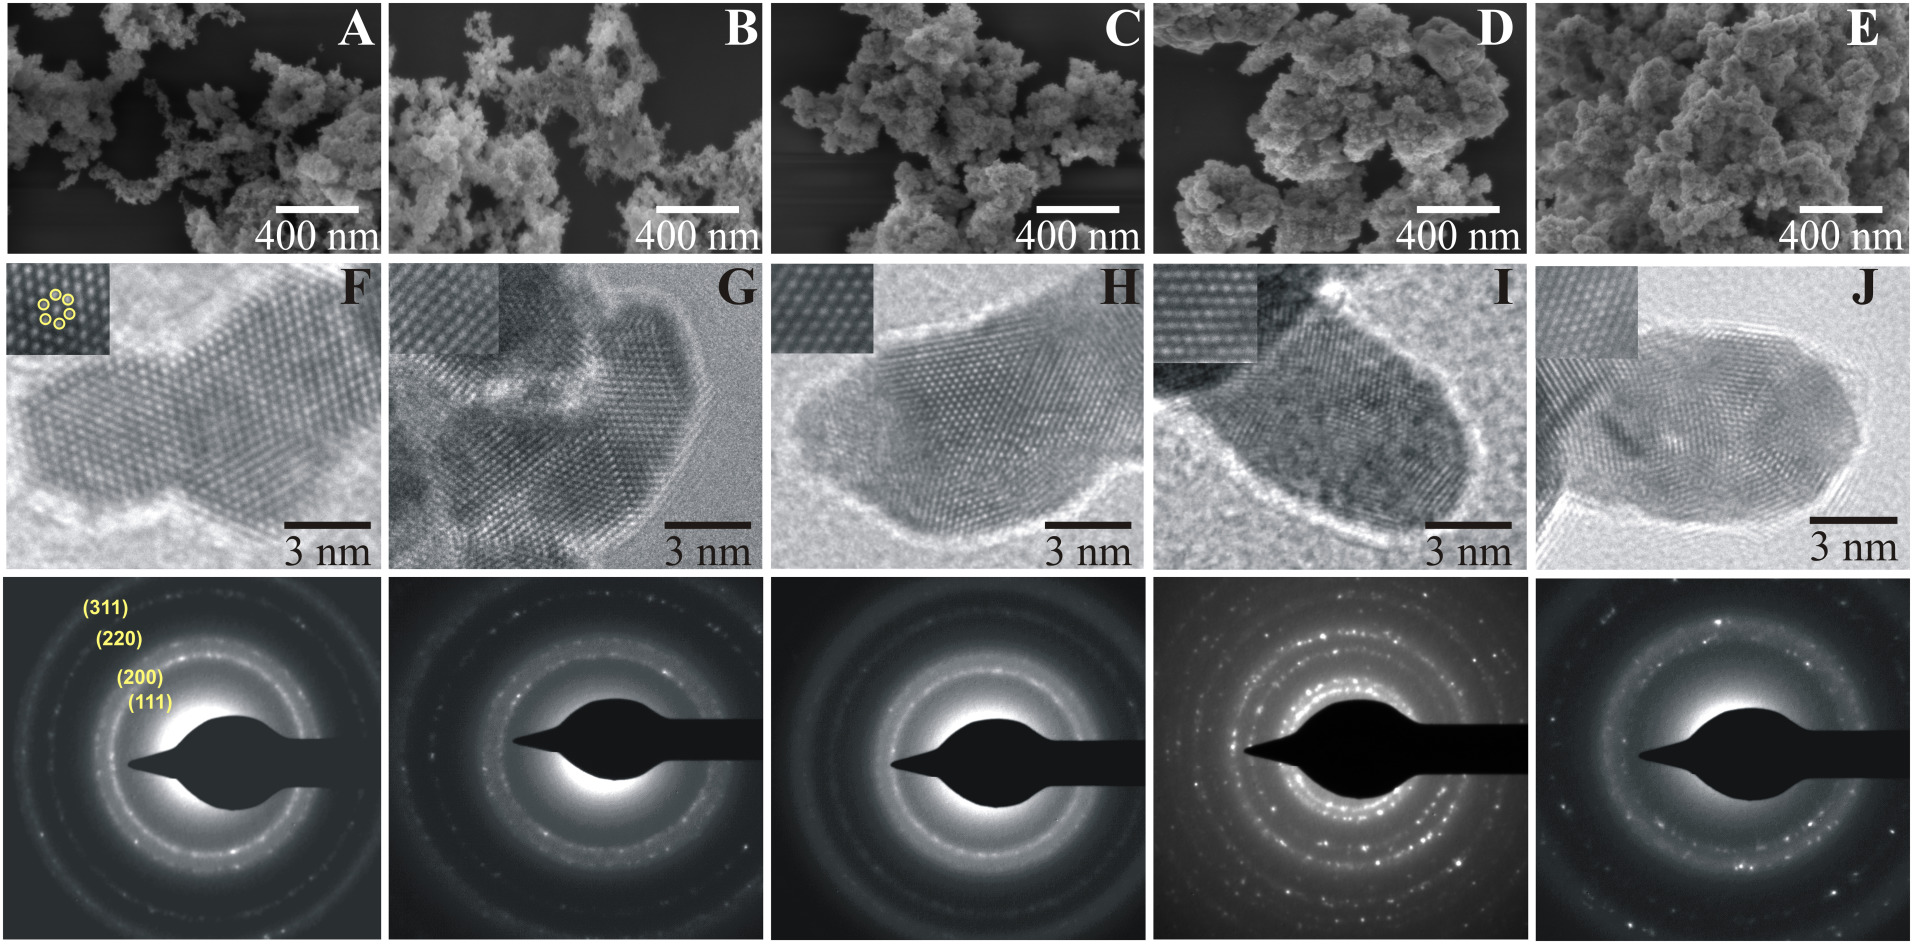 Microwave-Assisted Synthesis of Pt-Au Nanoparticles with Enhanced Electrocatalytic Activity for the Oxidation of Formic Acid